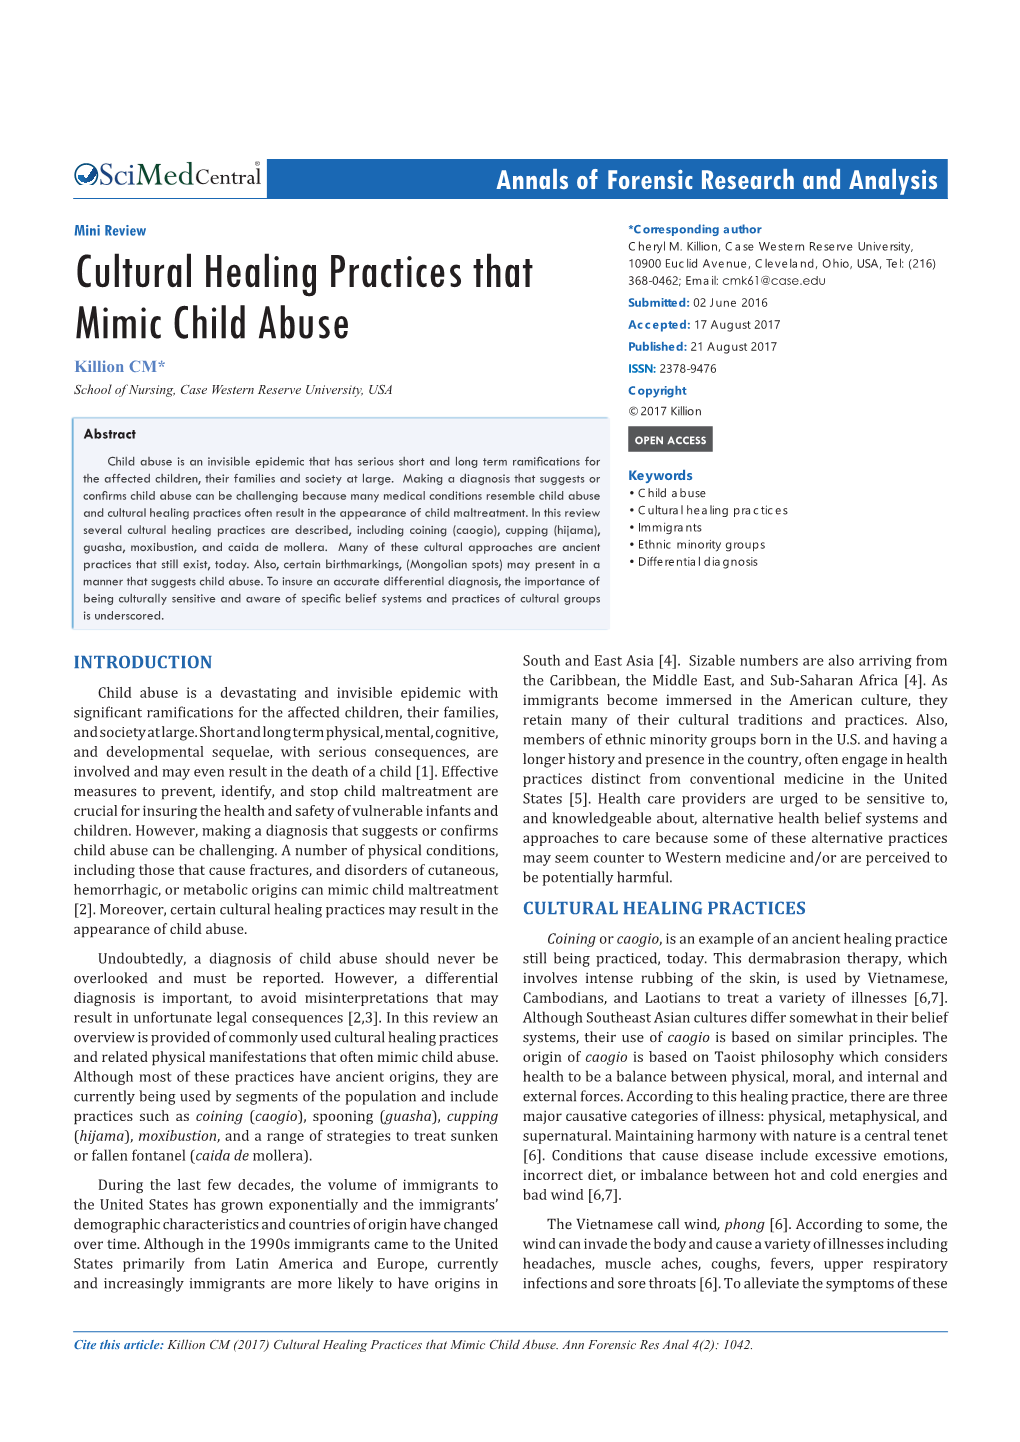 Cultural Healing Practices That Mimic Child Abuse